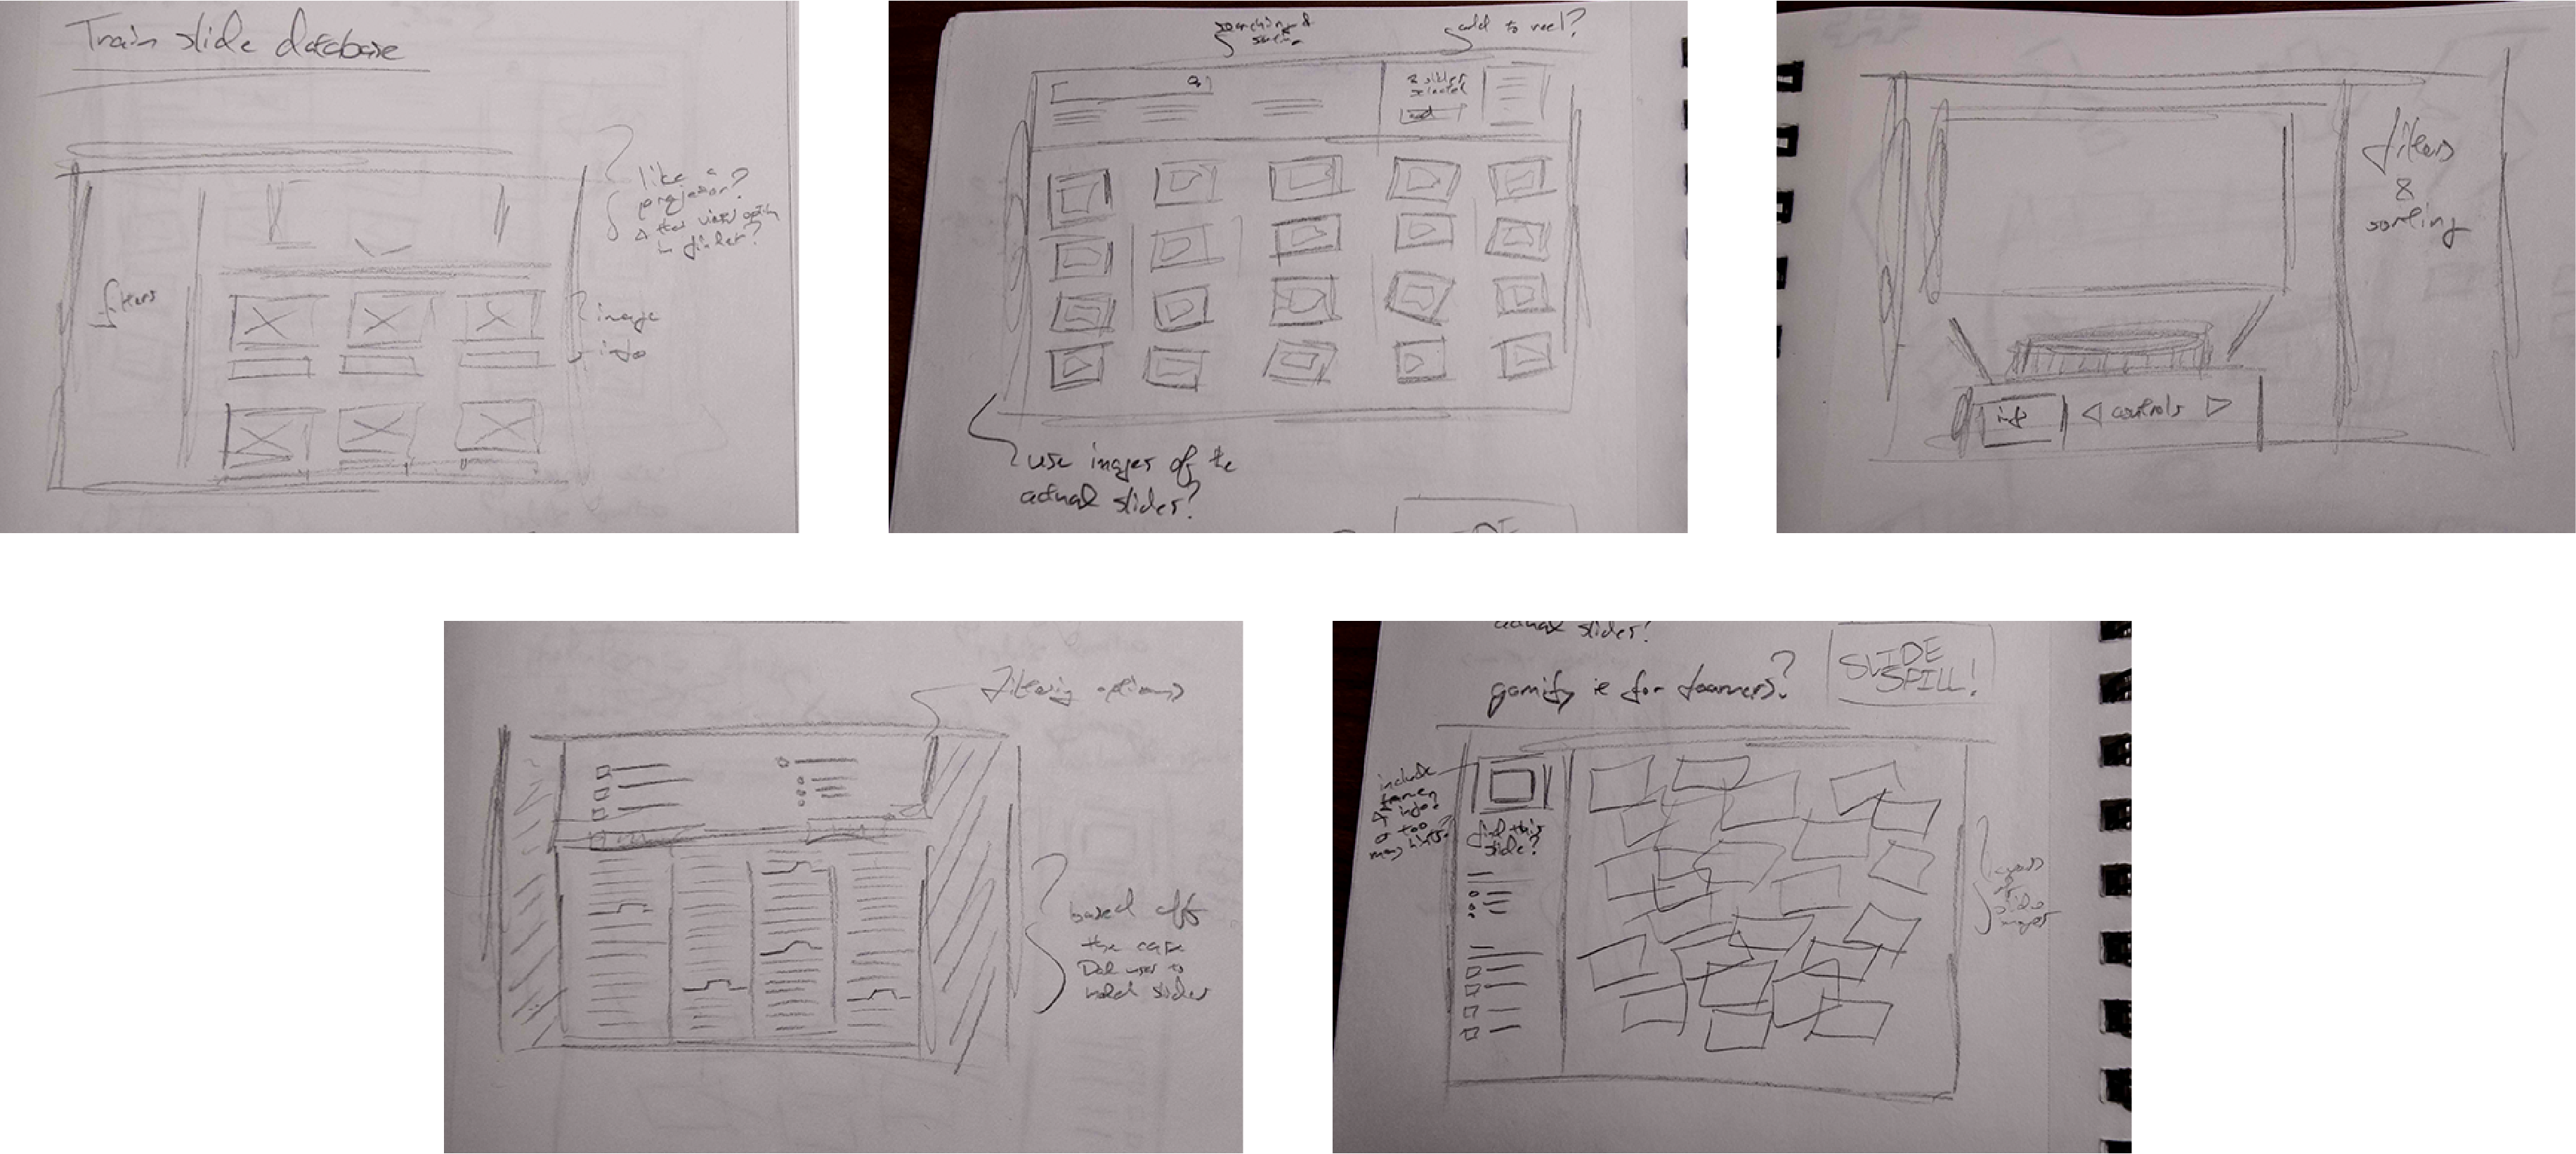 Five sketches of different user interface ideas.